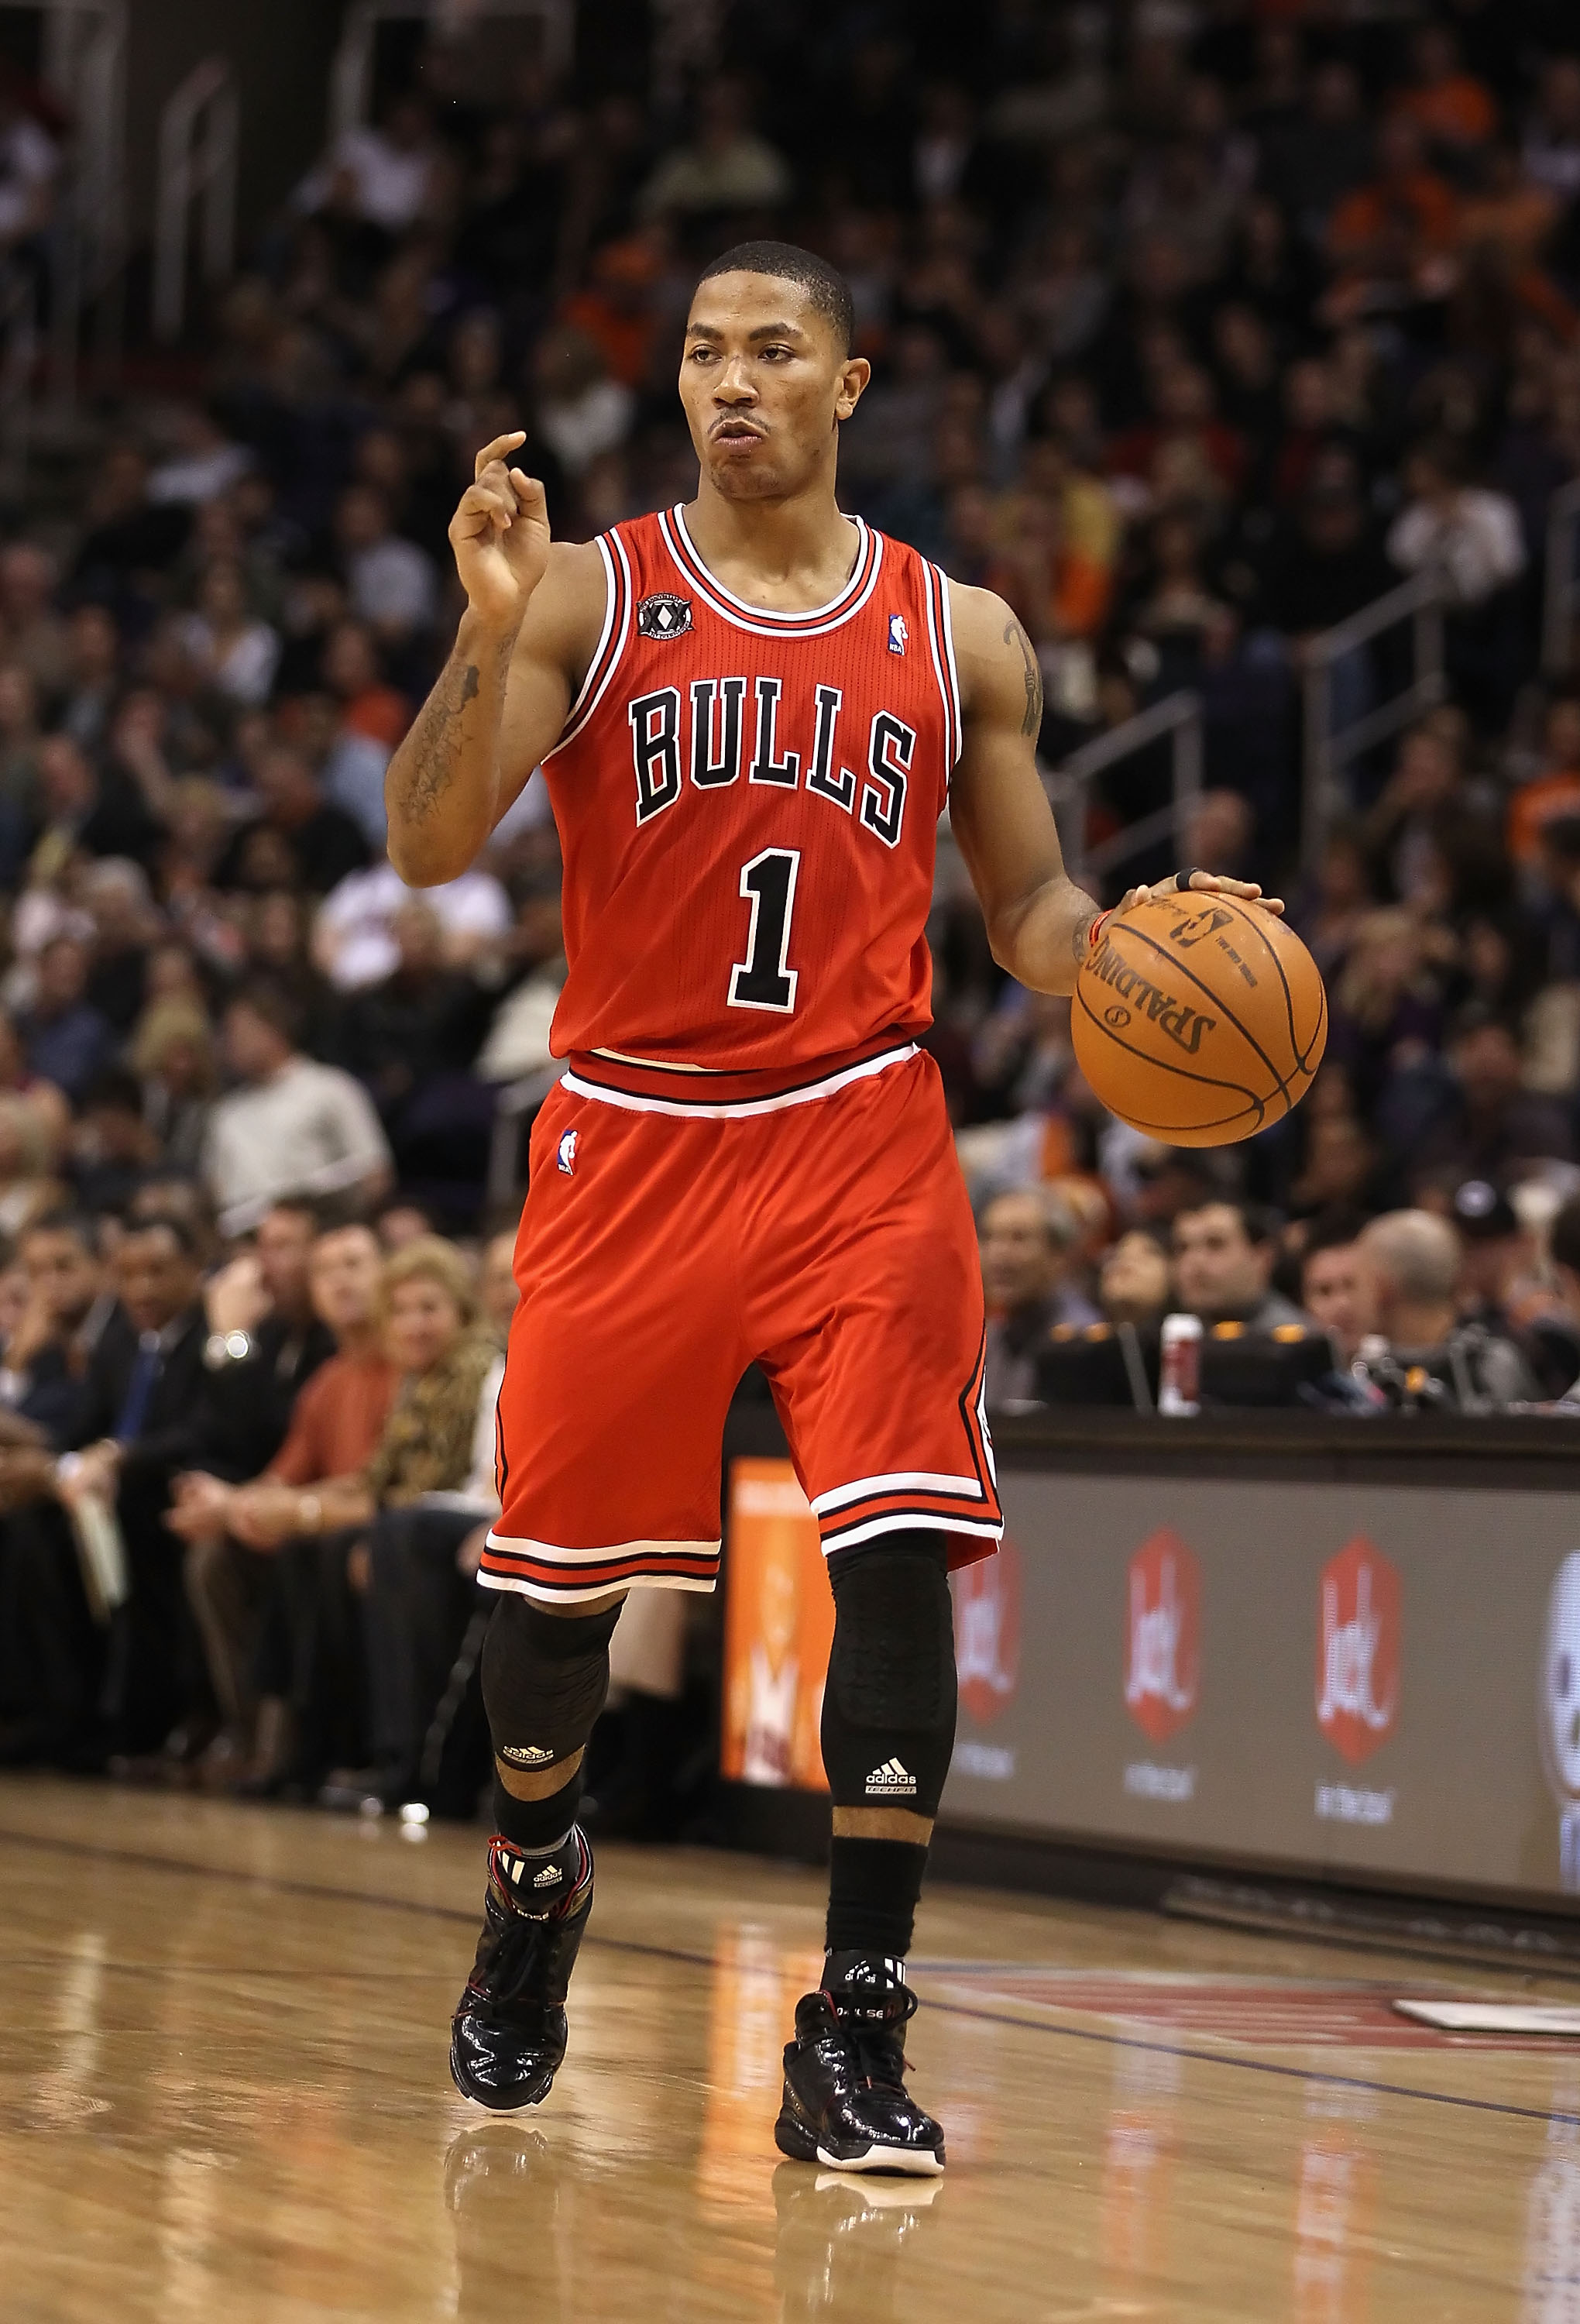 PHOENIX - NOVEMBER 24:  Derrick Rose #1 of the Chicago Bulls handles the ball during the NBA game against the Phoenix Suns at US Airways Center on November 24, 2010 in Phoenix, Arizona. The Bulls defeated the Suns 123-115 in double overtime. NOTE TO USER: